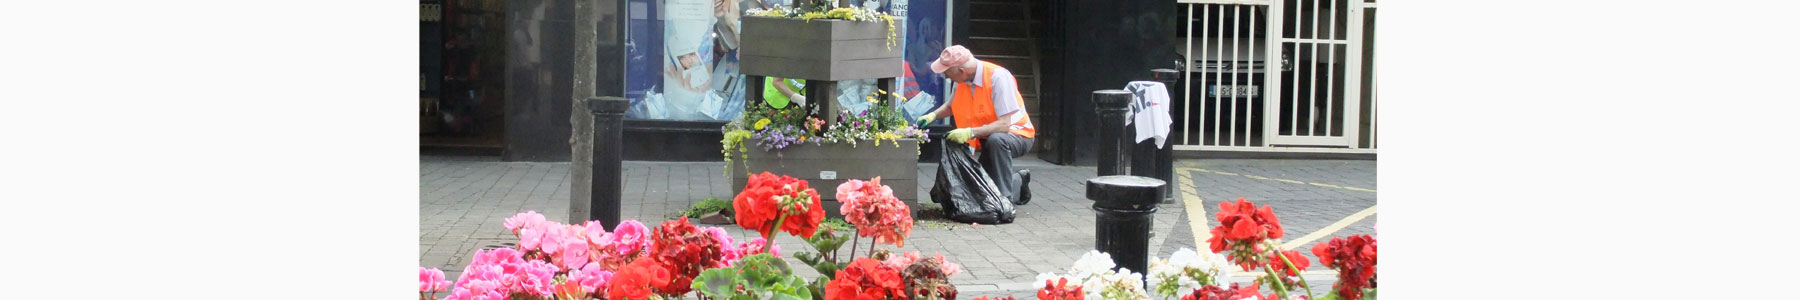 Tidy Towns at Work 1